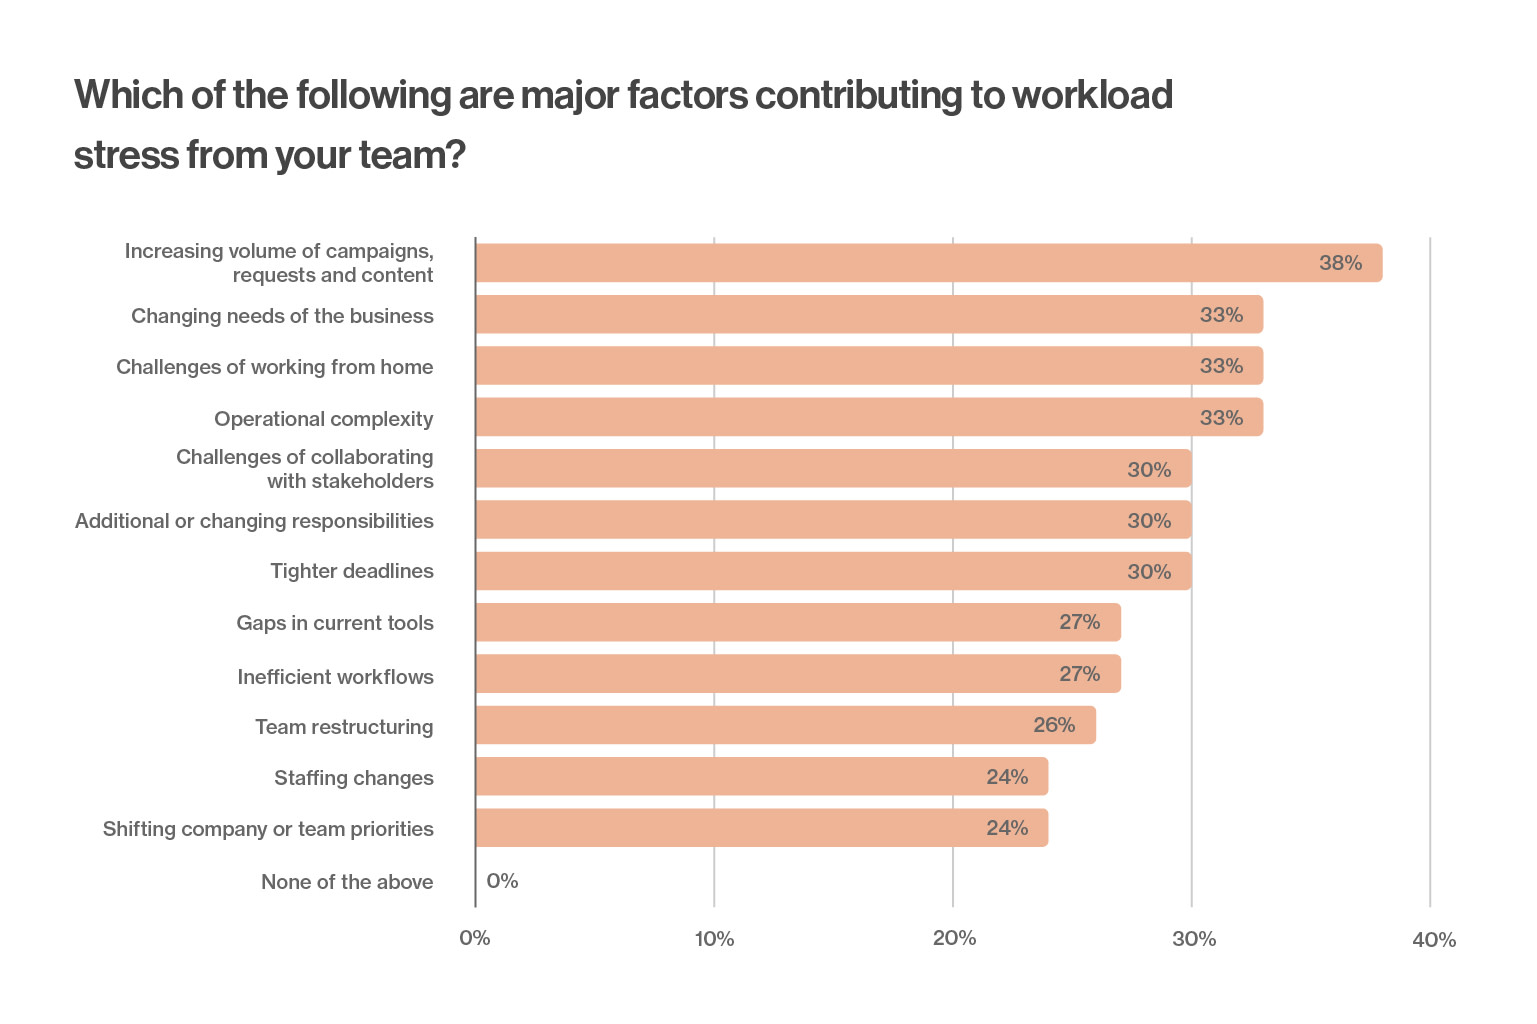 Survey question that reads: Which of the following are major factors contributing to workload stress for your team? Answer breakdown: 38% - Increasing volume of campaigns, requests, and content; 33% - Changing needs of the business; 33% - Challenges of working from home; 33% - Operational complexity; 30% - Challenges of collaborating with stakeholders; 30% - Additional or changing responsibilities; 30% - Tighter deadlines; 27% - Gaps in current tools; 27% - Inefficient workflows; 26% - Team restructuring; 24% - Staffing changes; 24% - Shifting company or team priorities; 0% - None of the above